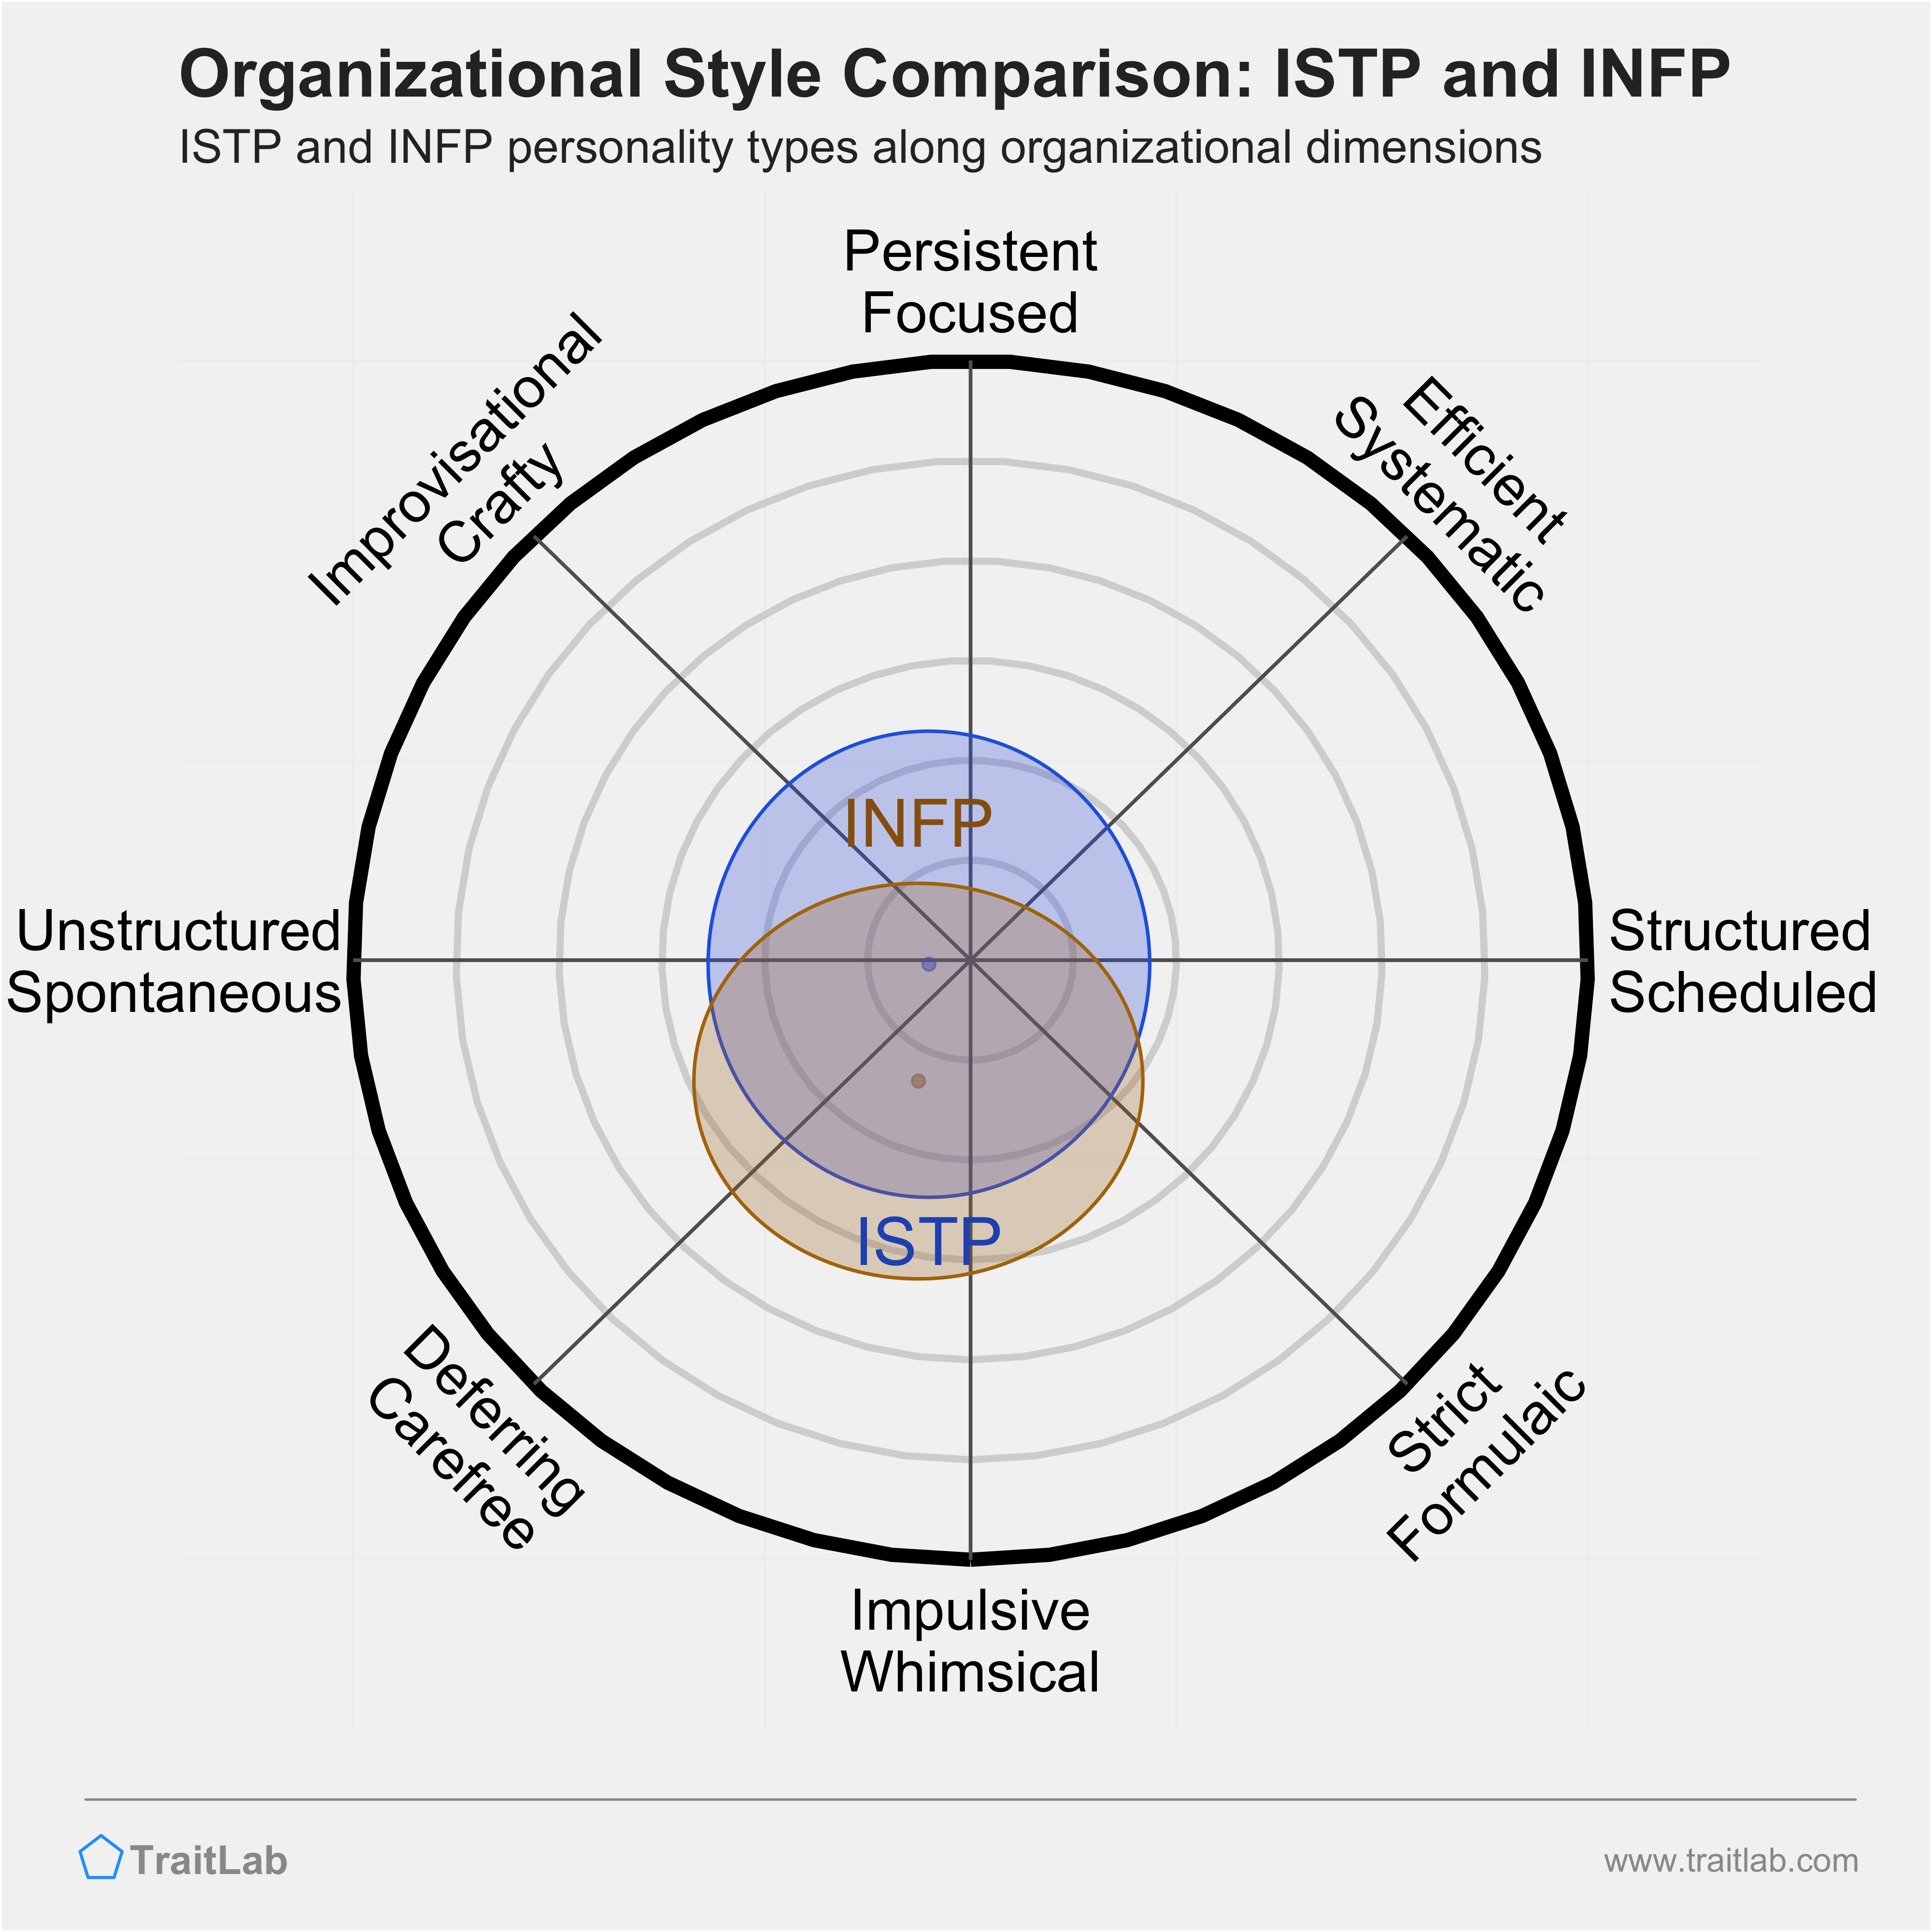 ISTP and INFP comparison across organizational dimensions